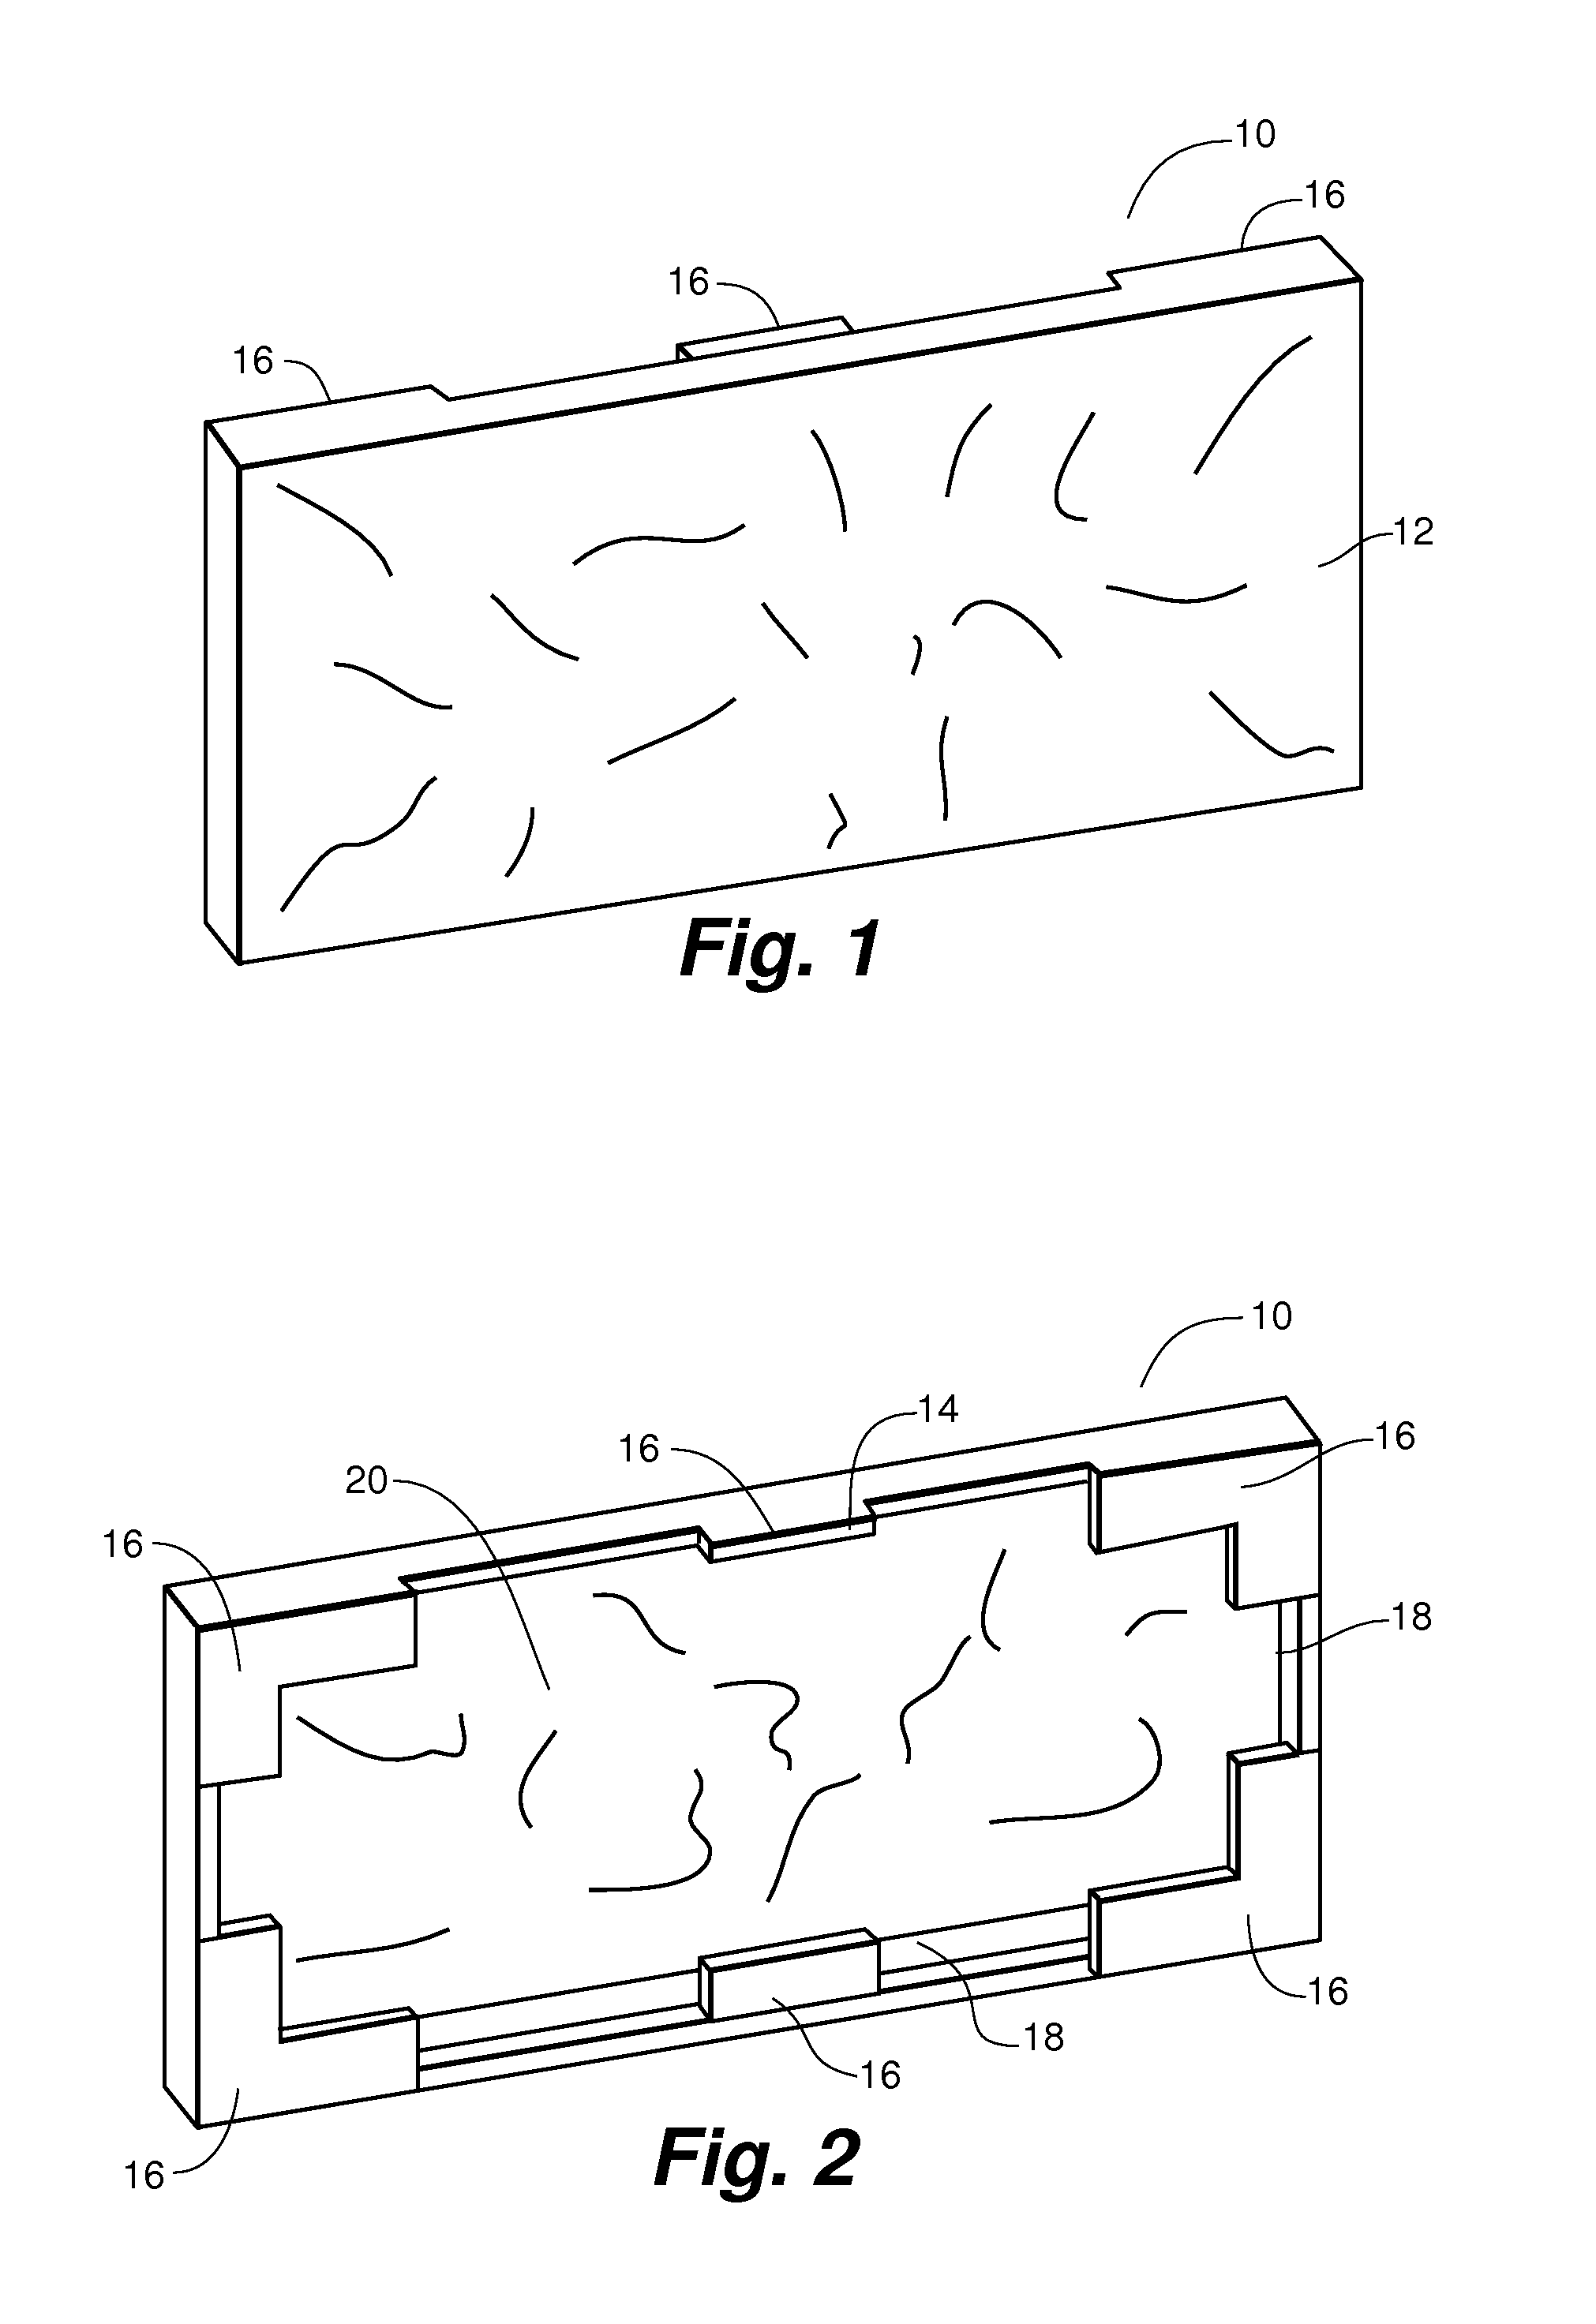 Polymeric or composite wall and surface veneering products, systems and methods of use thereof